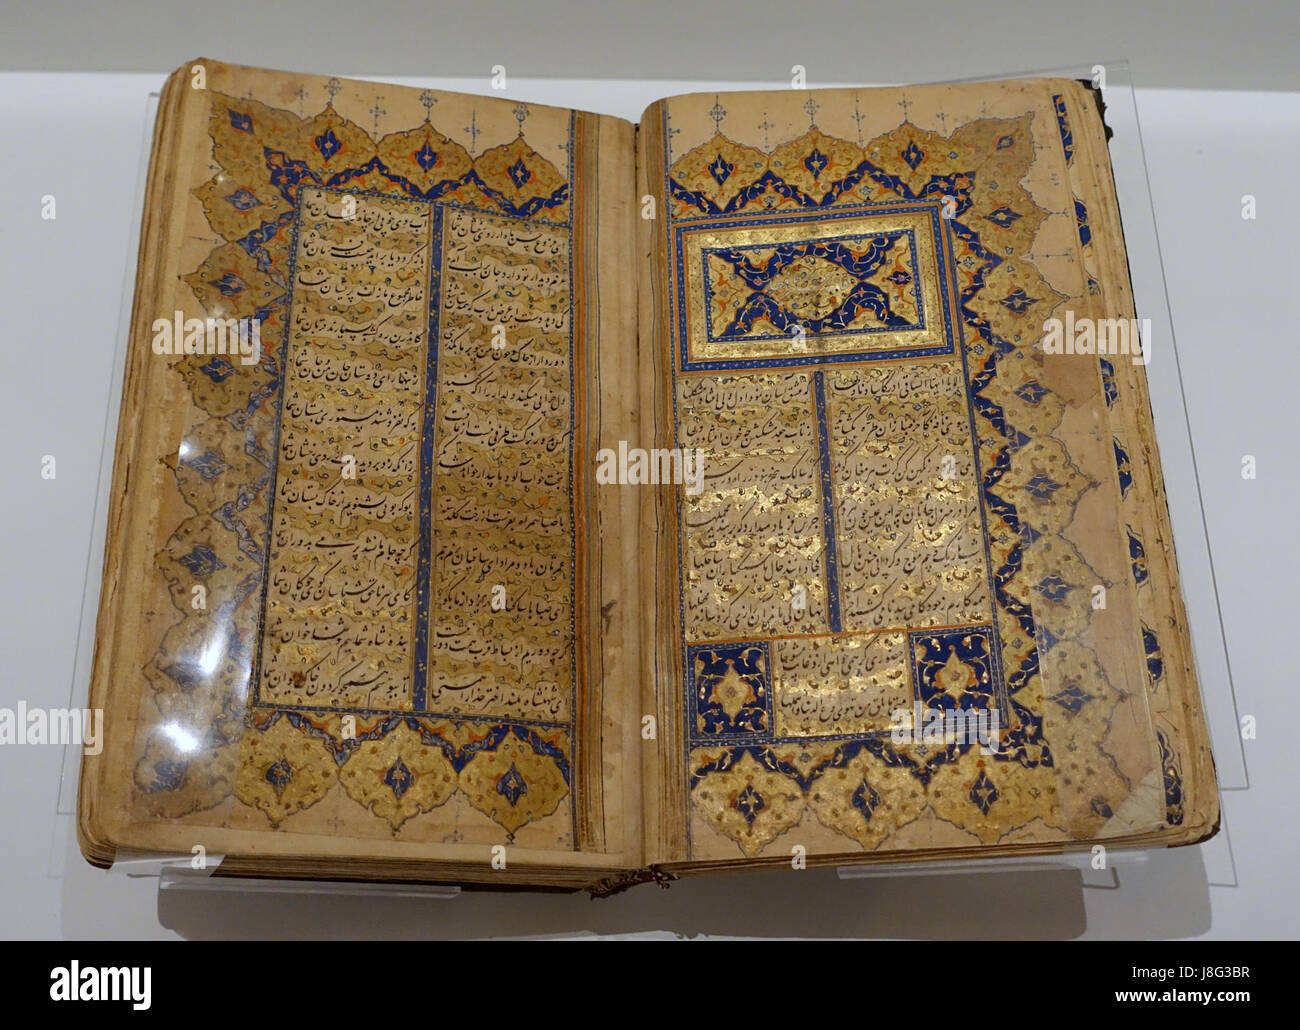 Divan, collected works, by Hafez, calligraphy by Enayatollah al Shirazi, Iran, late 16th century AD, ink, watercolour, gold on paper   Aga Khan Museum   Toronto, Canada   DSC06699 Stock Photo